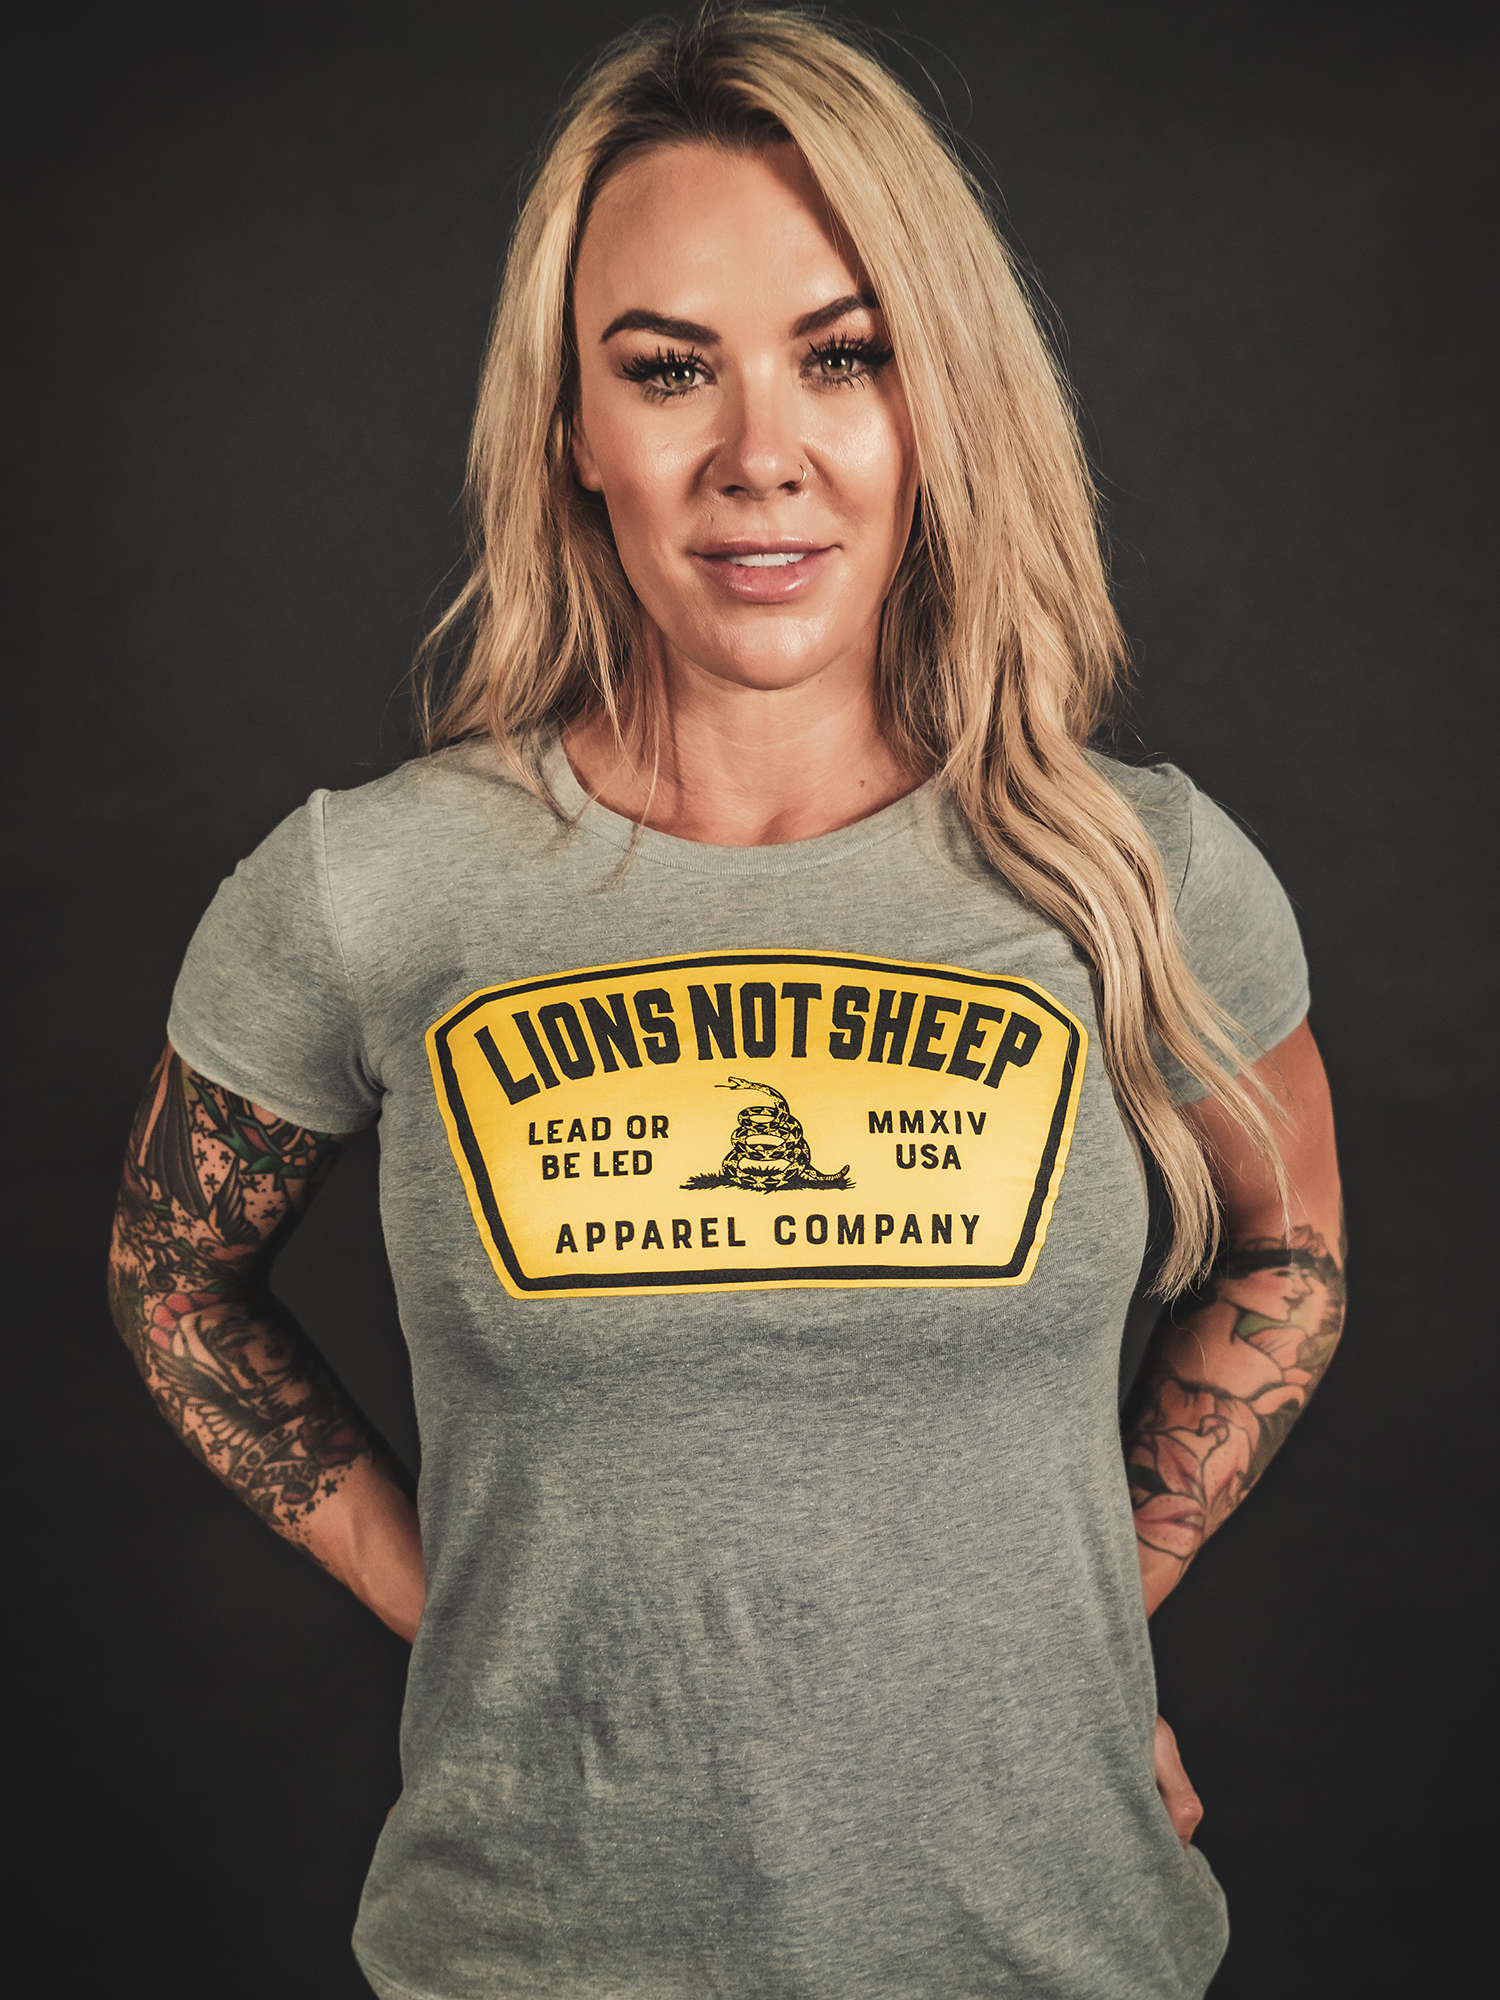 LEAD FROM THE FRONT Womens Tee - Lions Not Sheep ®